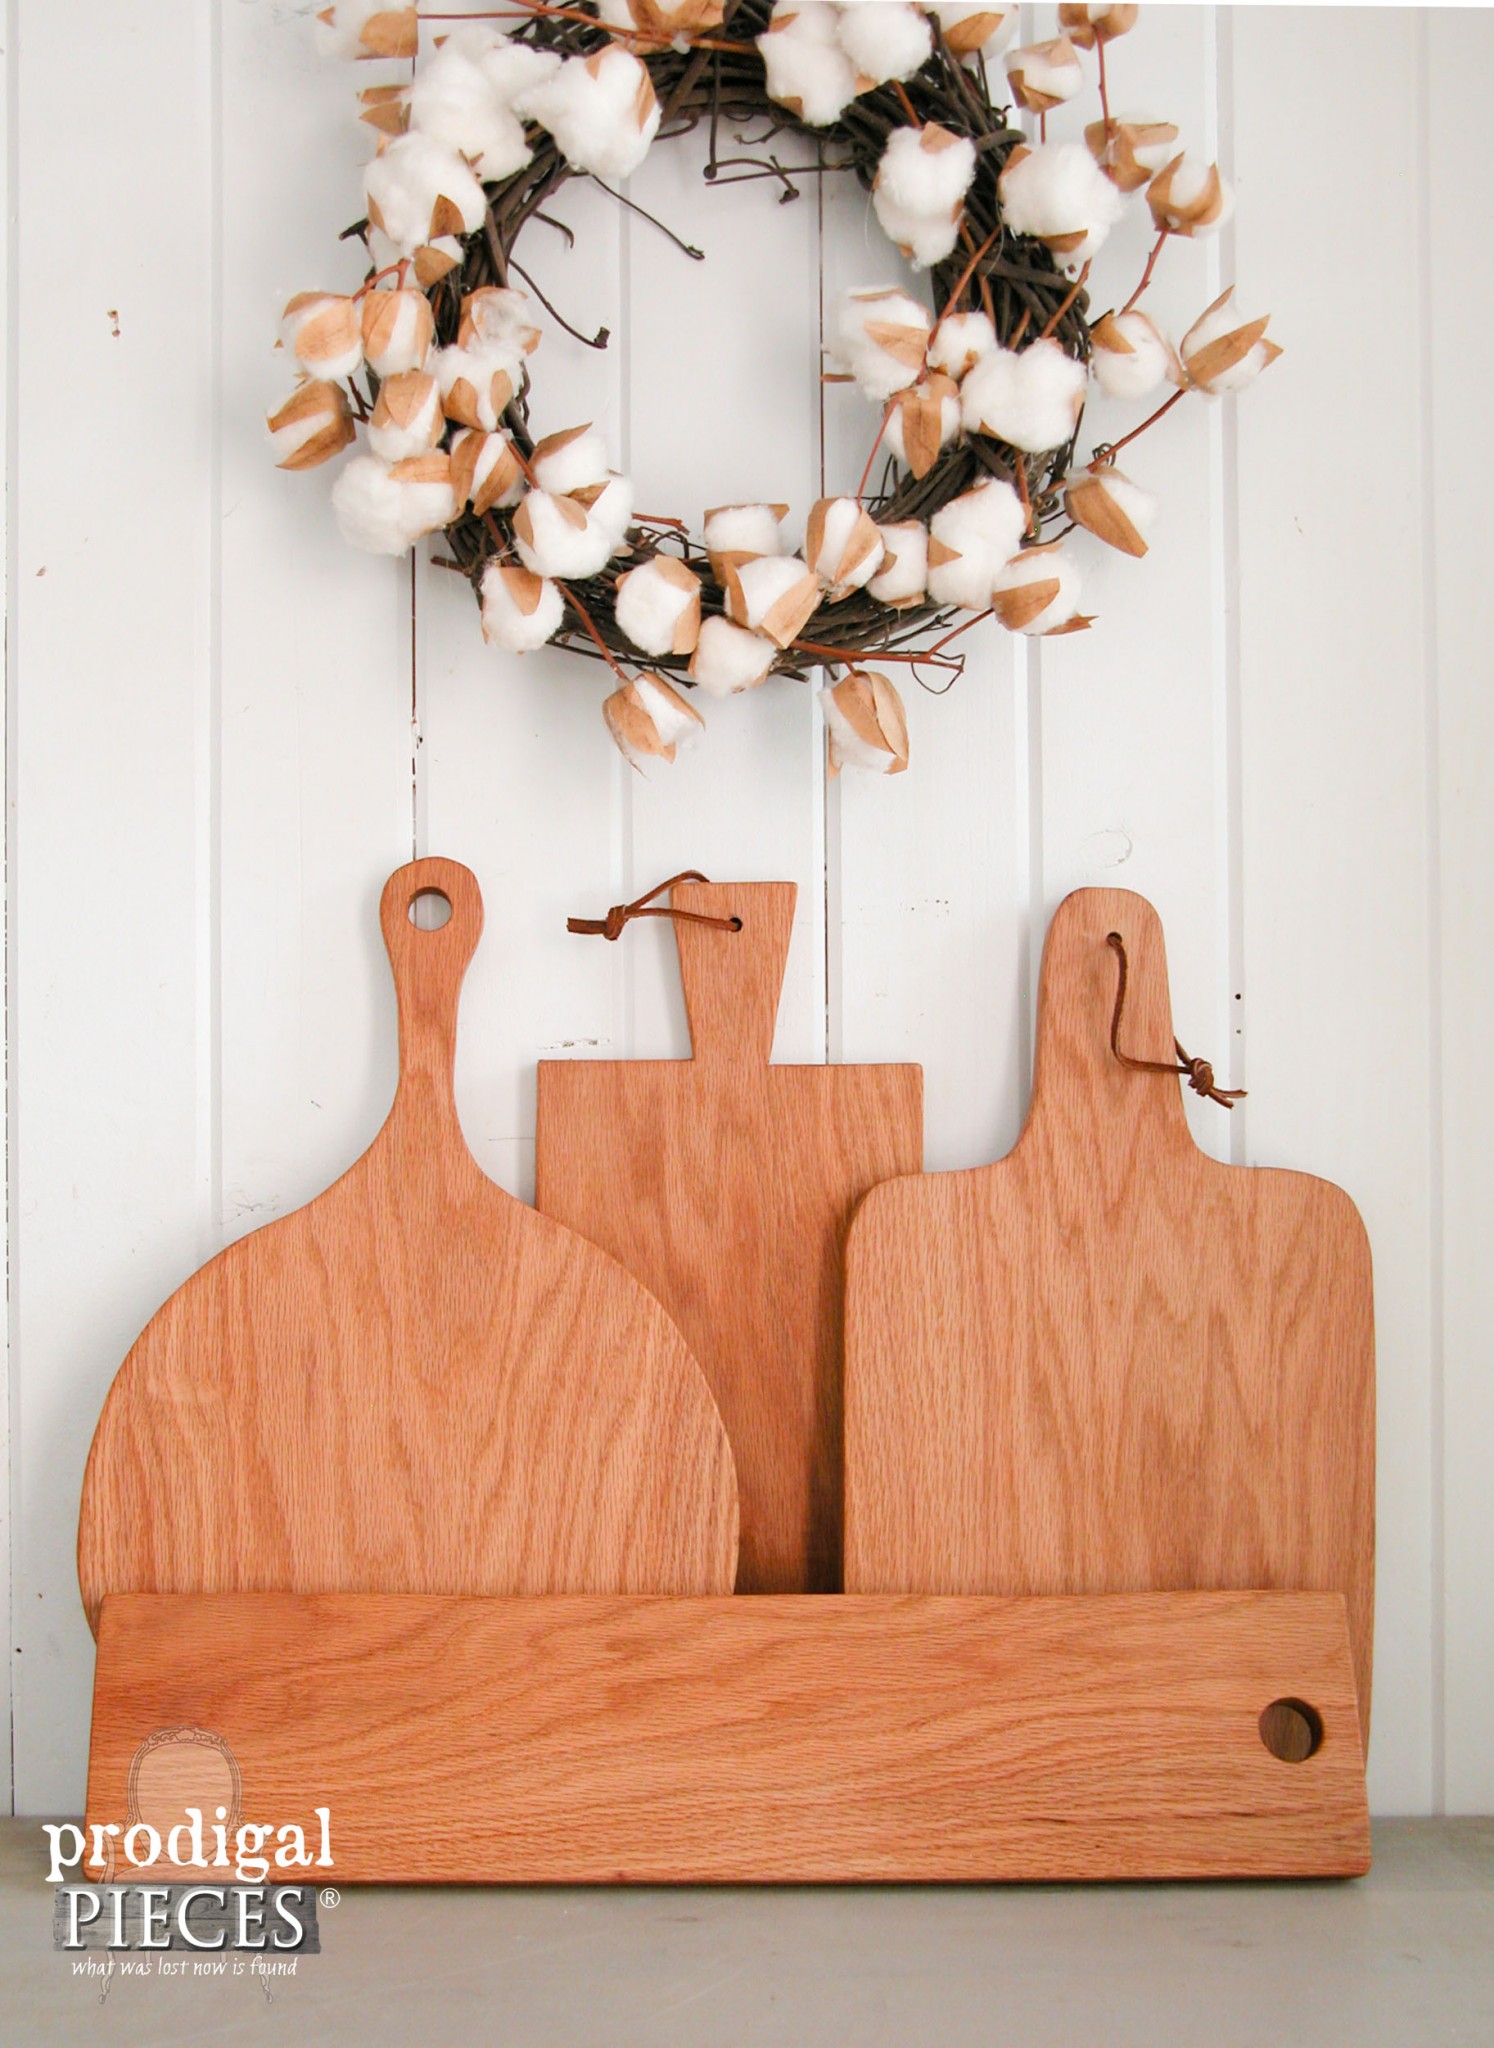 You Can Have Your Own Collection of Farmhouse Cutting Boards for $34 Using this Tutorial by Prodigal Pieces | www.prodigalpieces.com